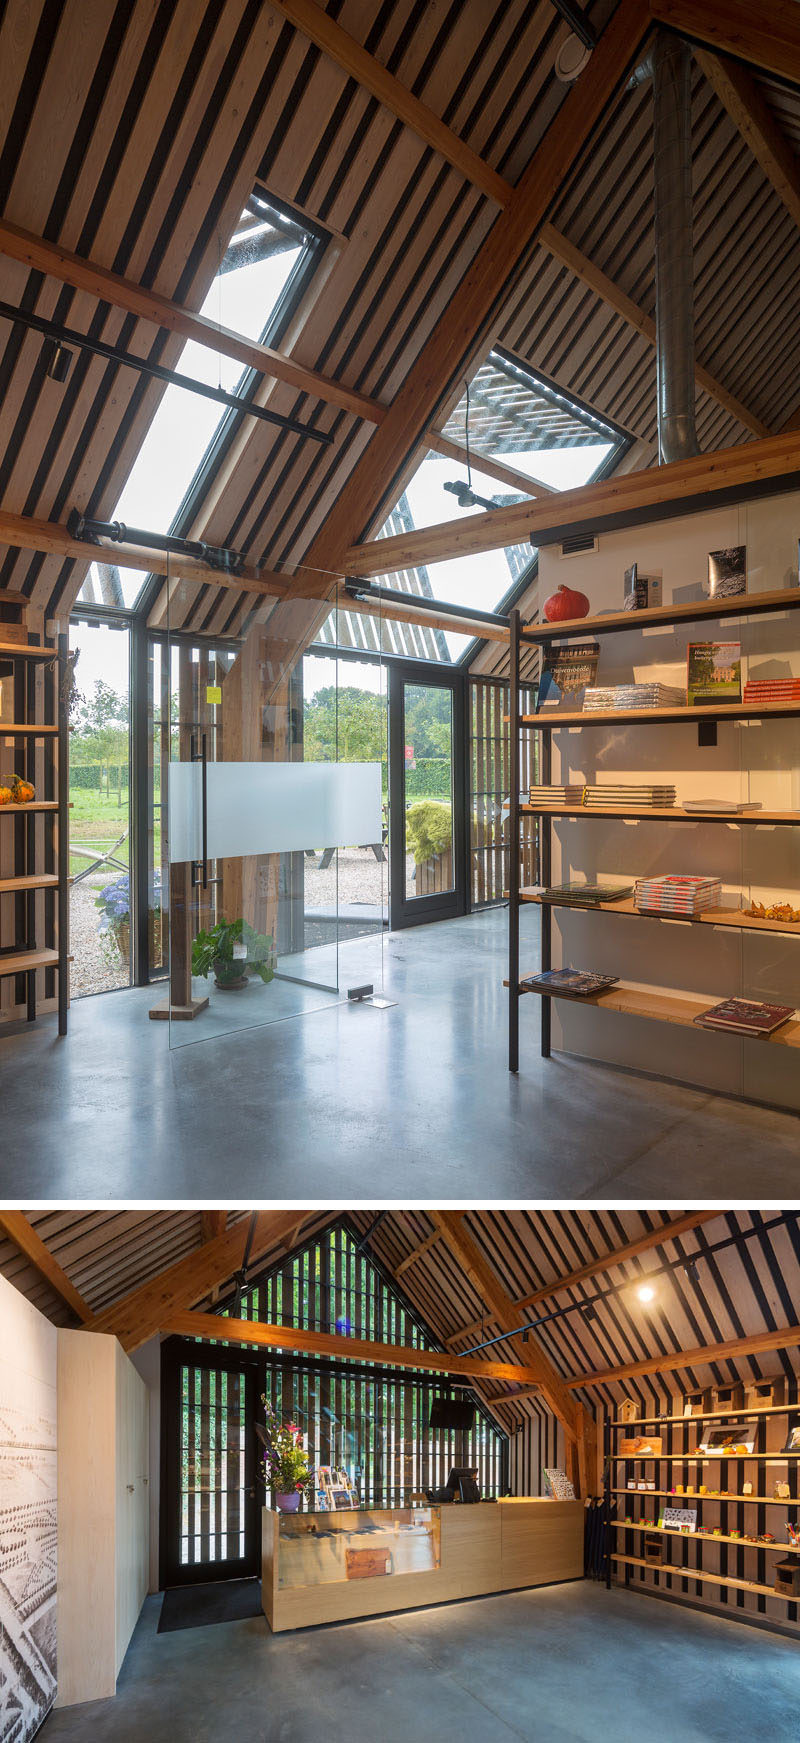 This barn-like building is home to a restaurant, a museum shop and space for the volunteers who give guided tours in the castle and around the estate. #Architecture